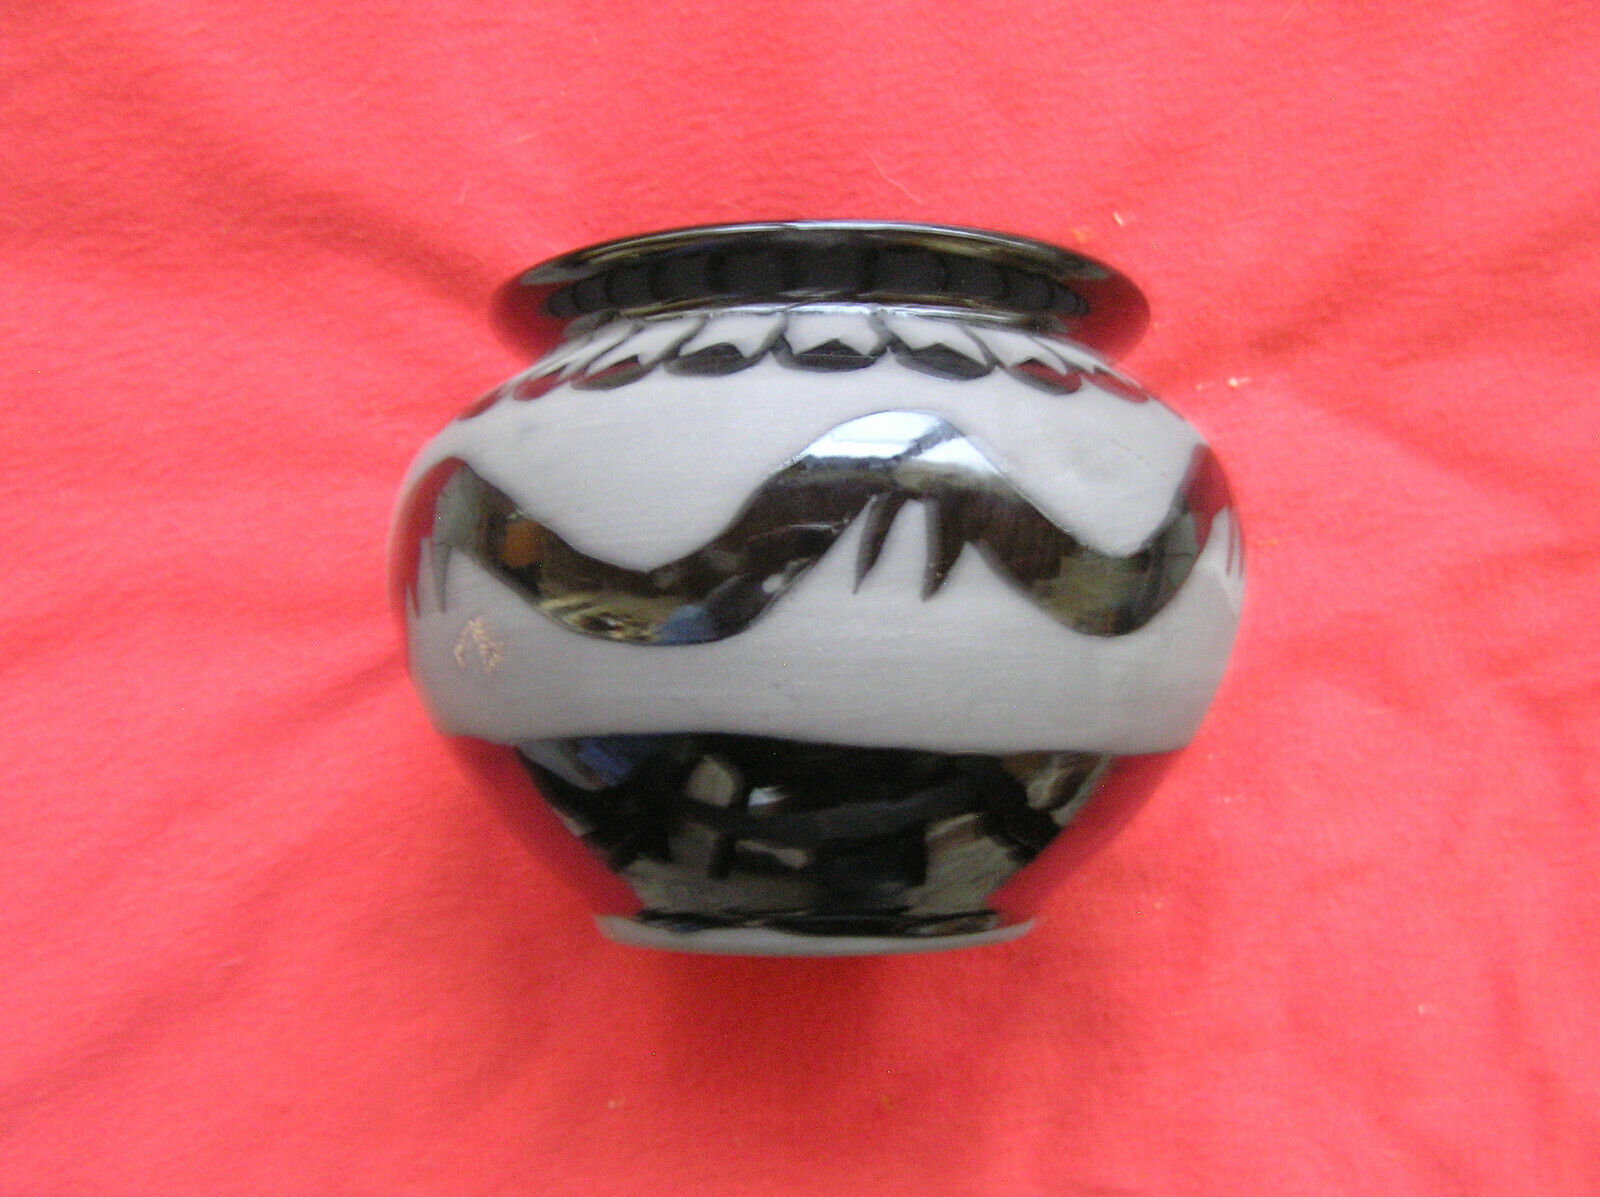 834. Native Am. black smoked/polished bowl depicting snake/serpent,signed/dated